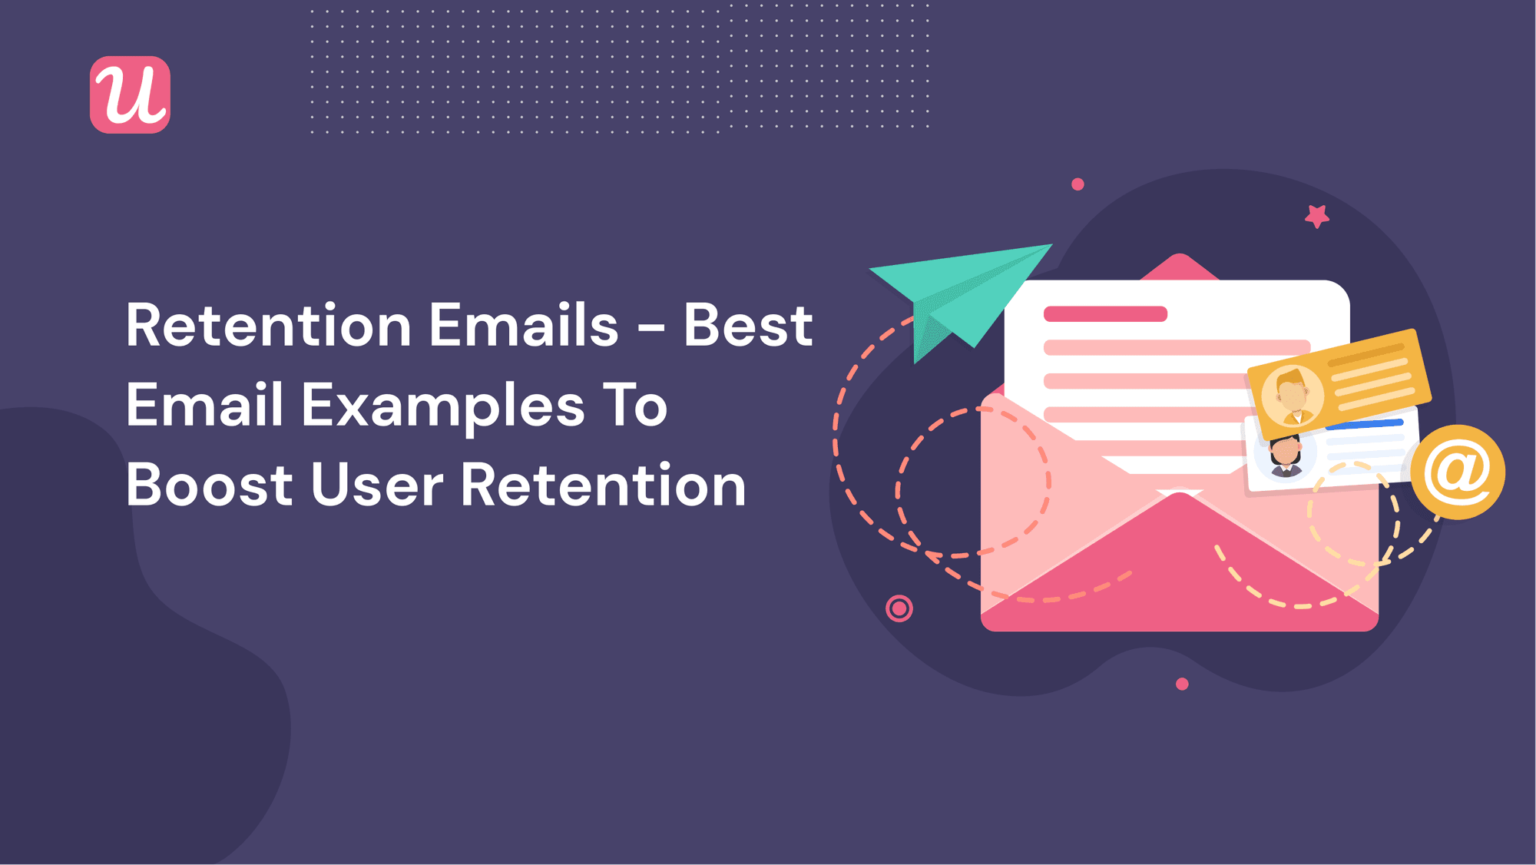 5 of The Best Customer Retention Emails (With Examples)